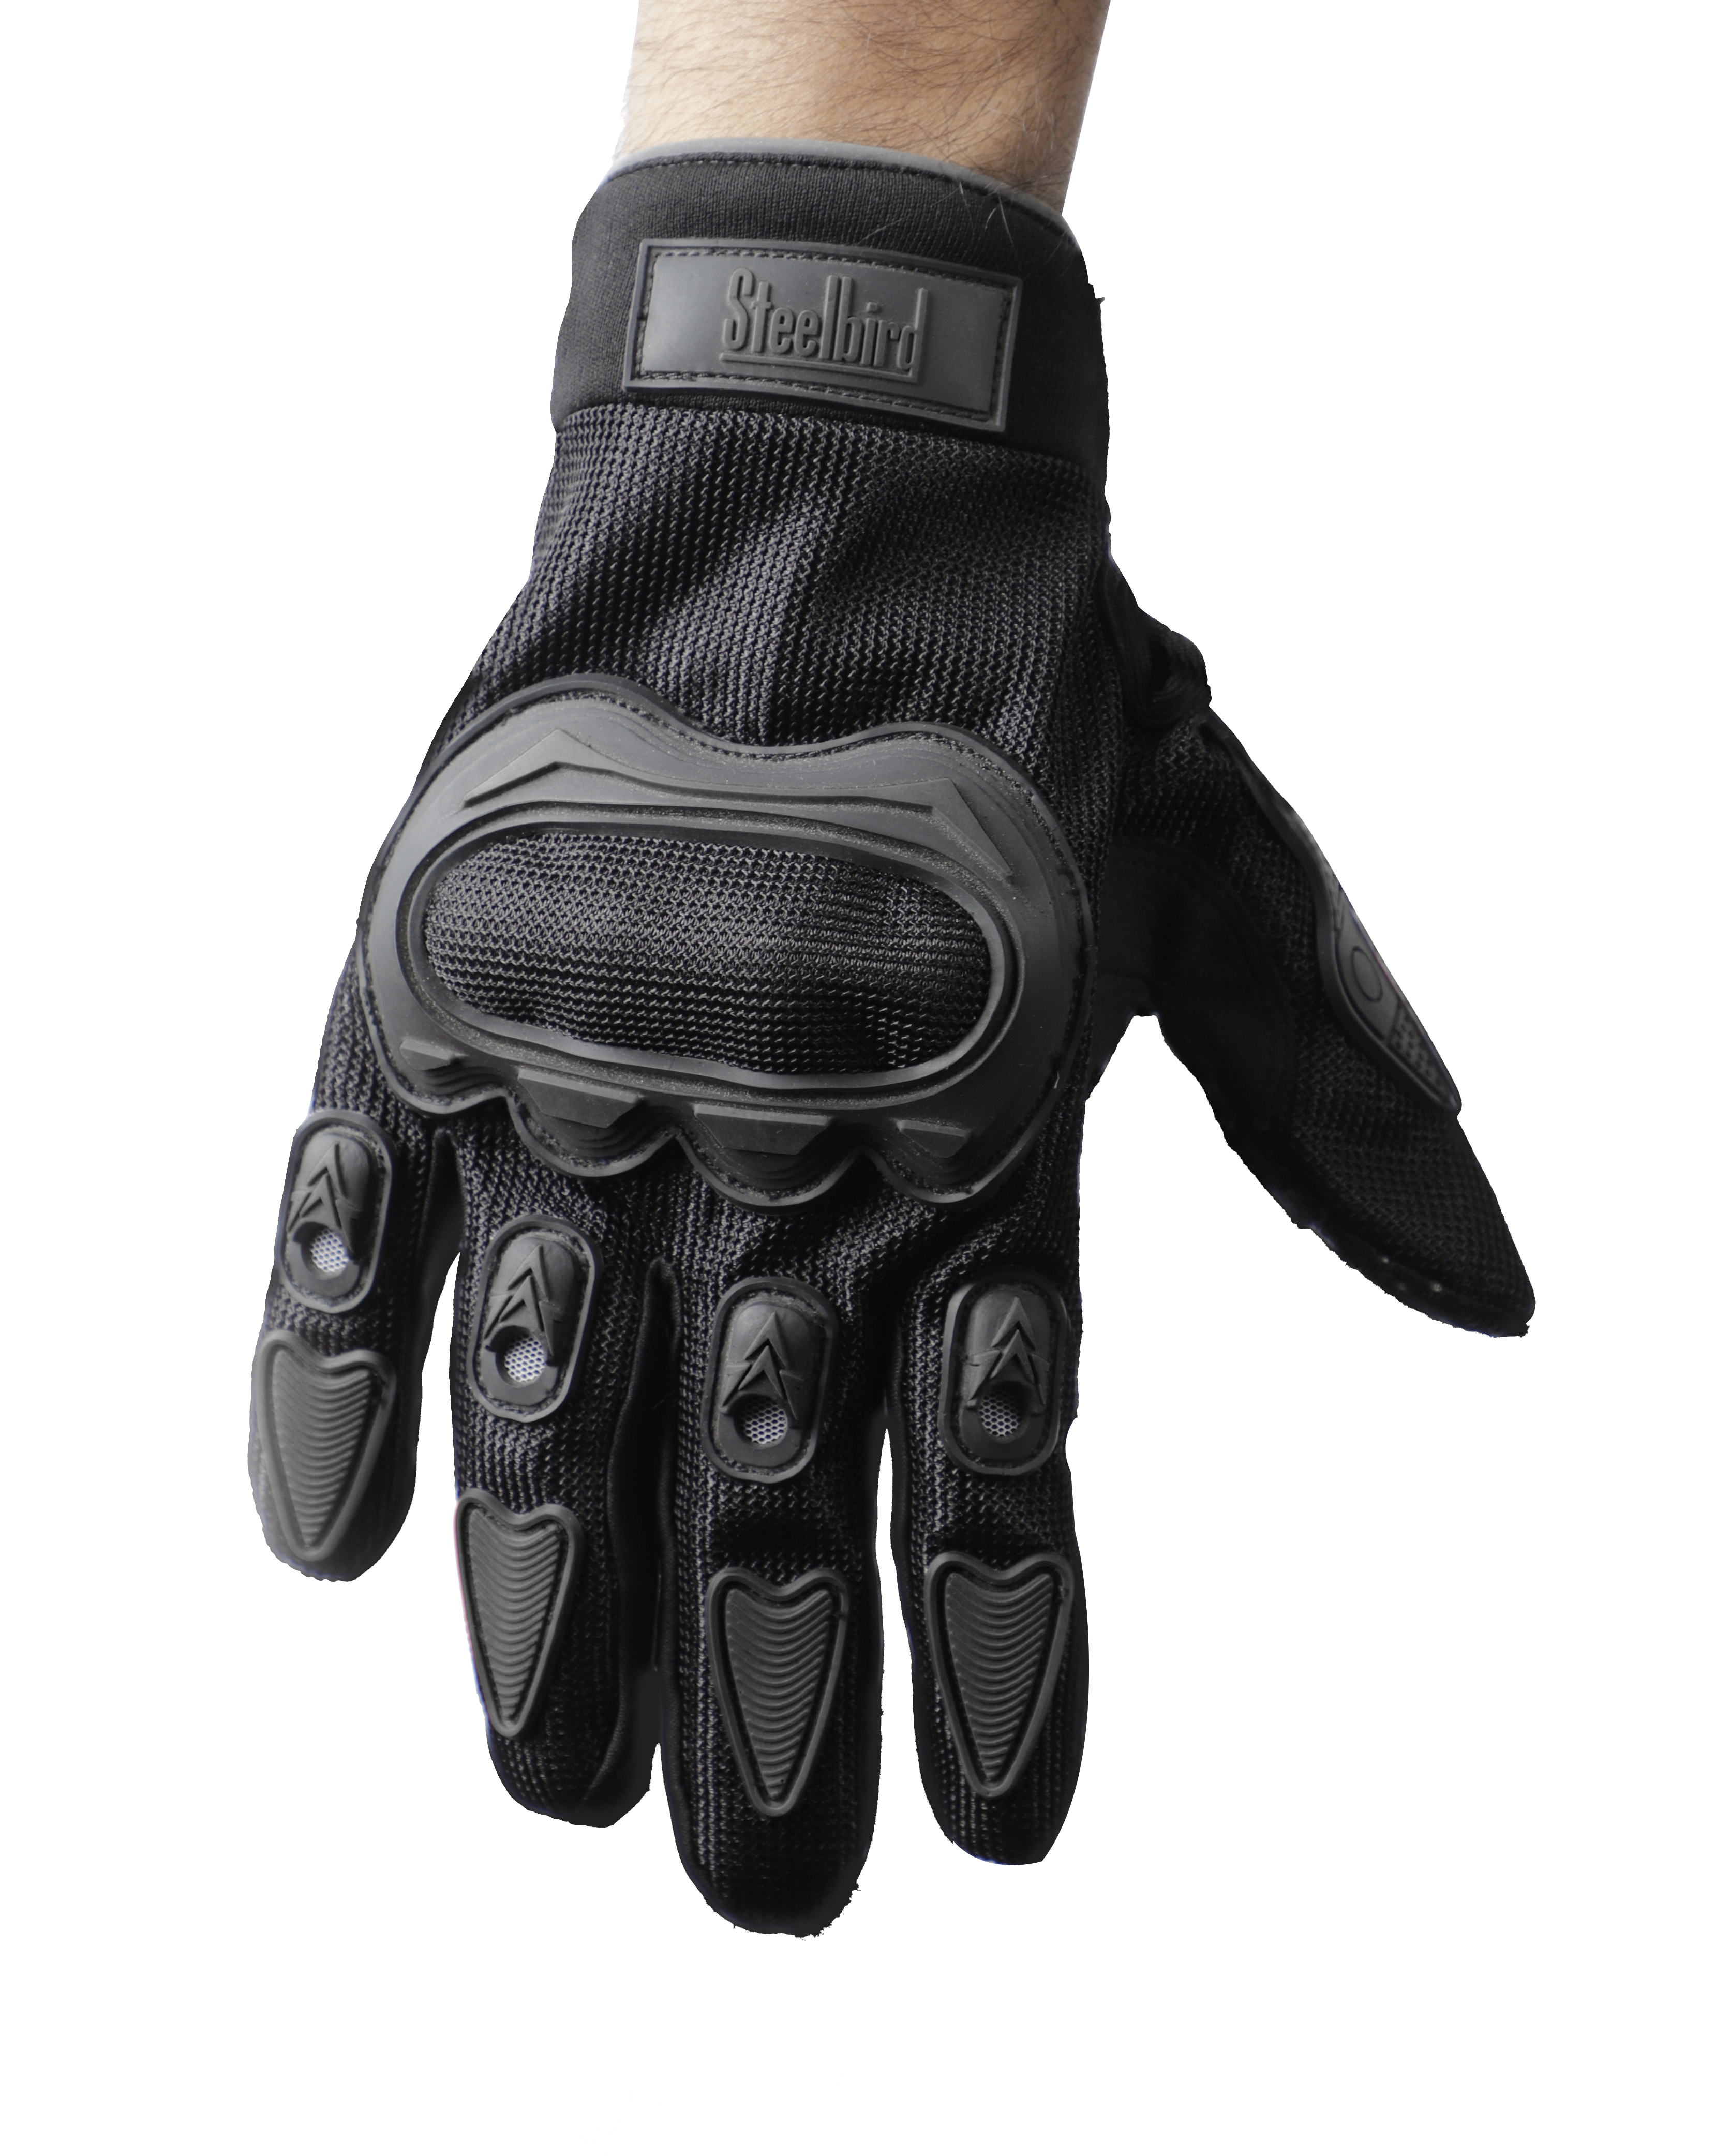 Steelbird Full Finger Bike Riding Gloves With Touch Screen Sensitivity At Thumb And Index Finger, Protective Off-Road Motorbike Racing (Grey)